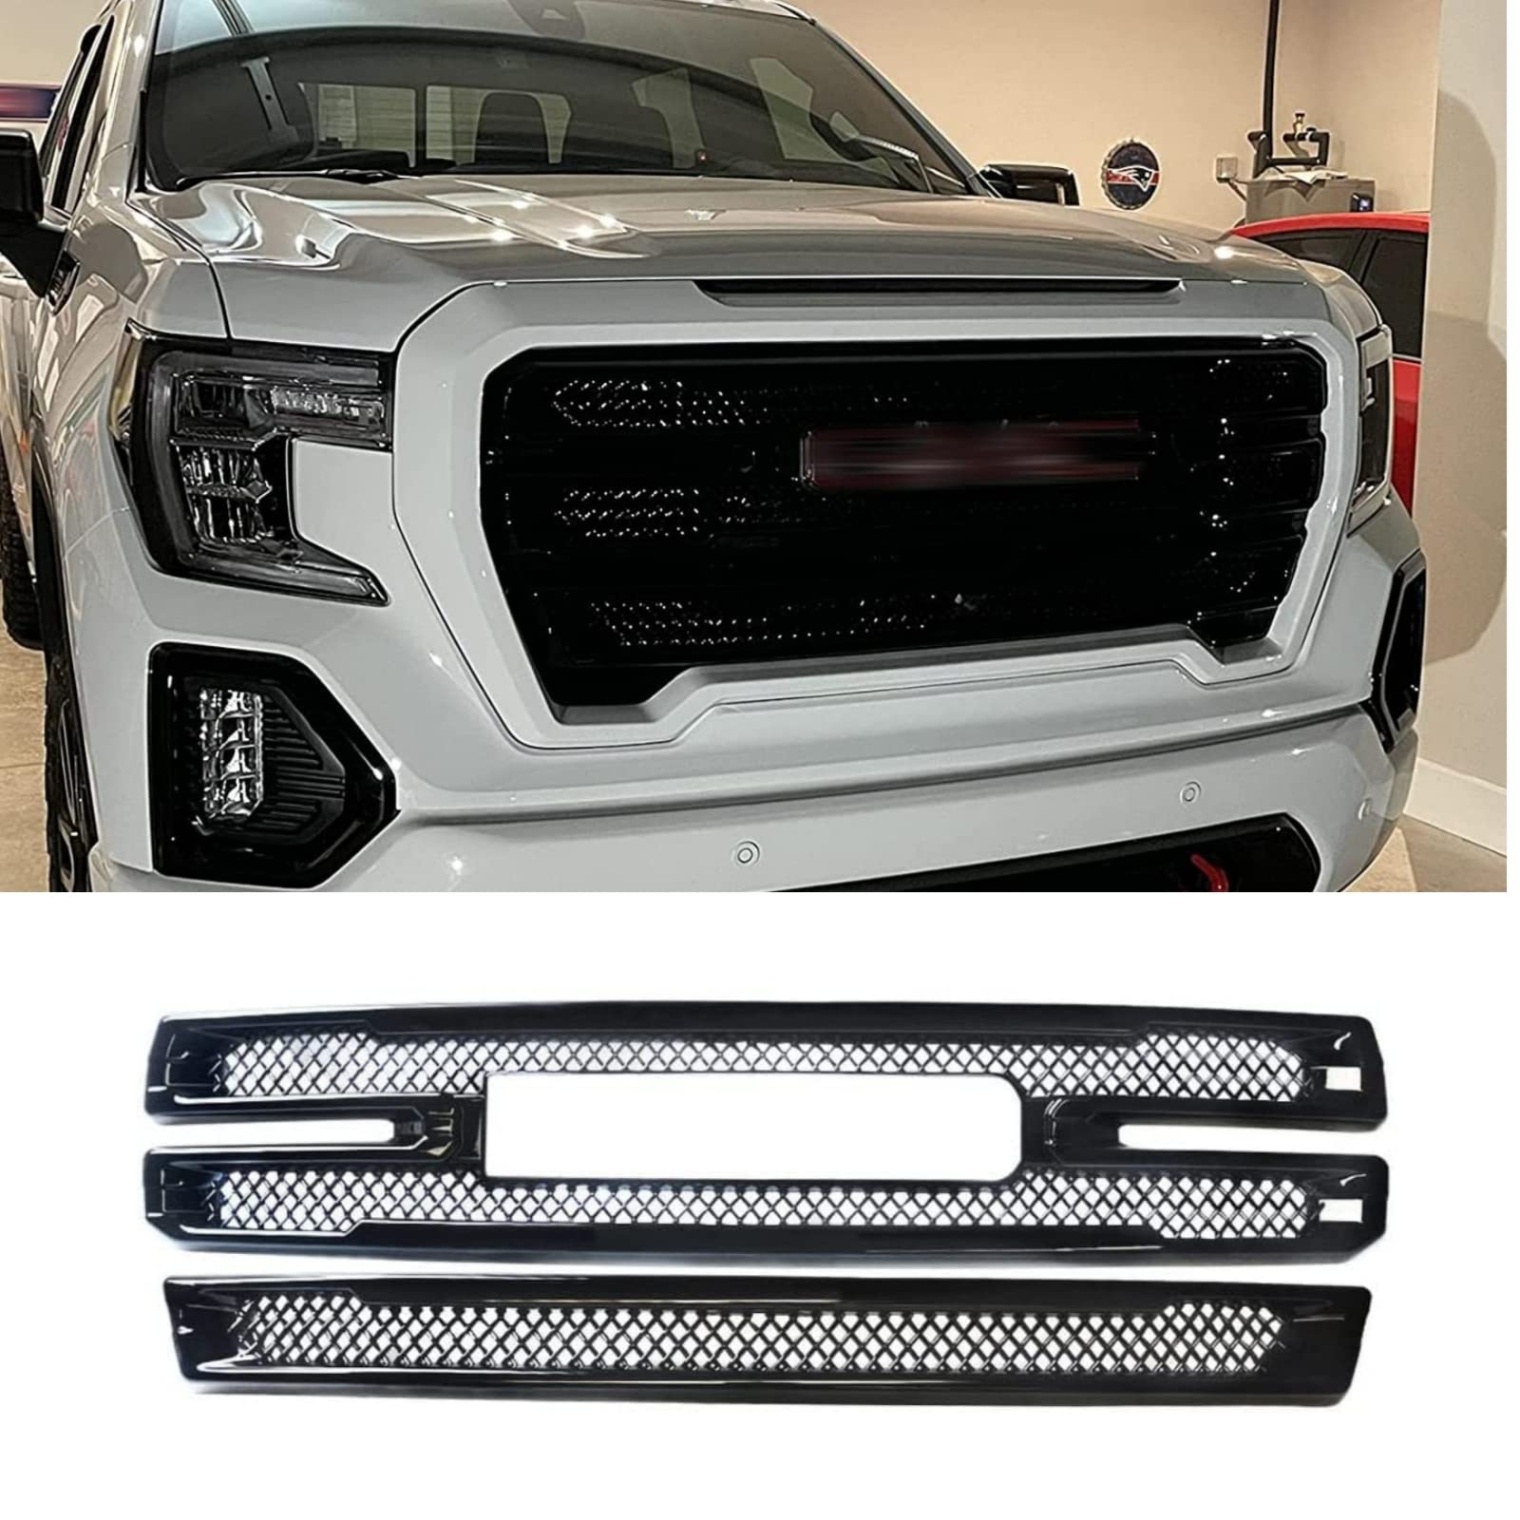 2021 gmc sierra accessories Bulan 1 Grill Fit For - GMC Sierra  SLT AT Front Grille Cover Front  Bumper ABS Painted Overlay Trim Kit Sierra Accessories Exterior Gloss Black